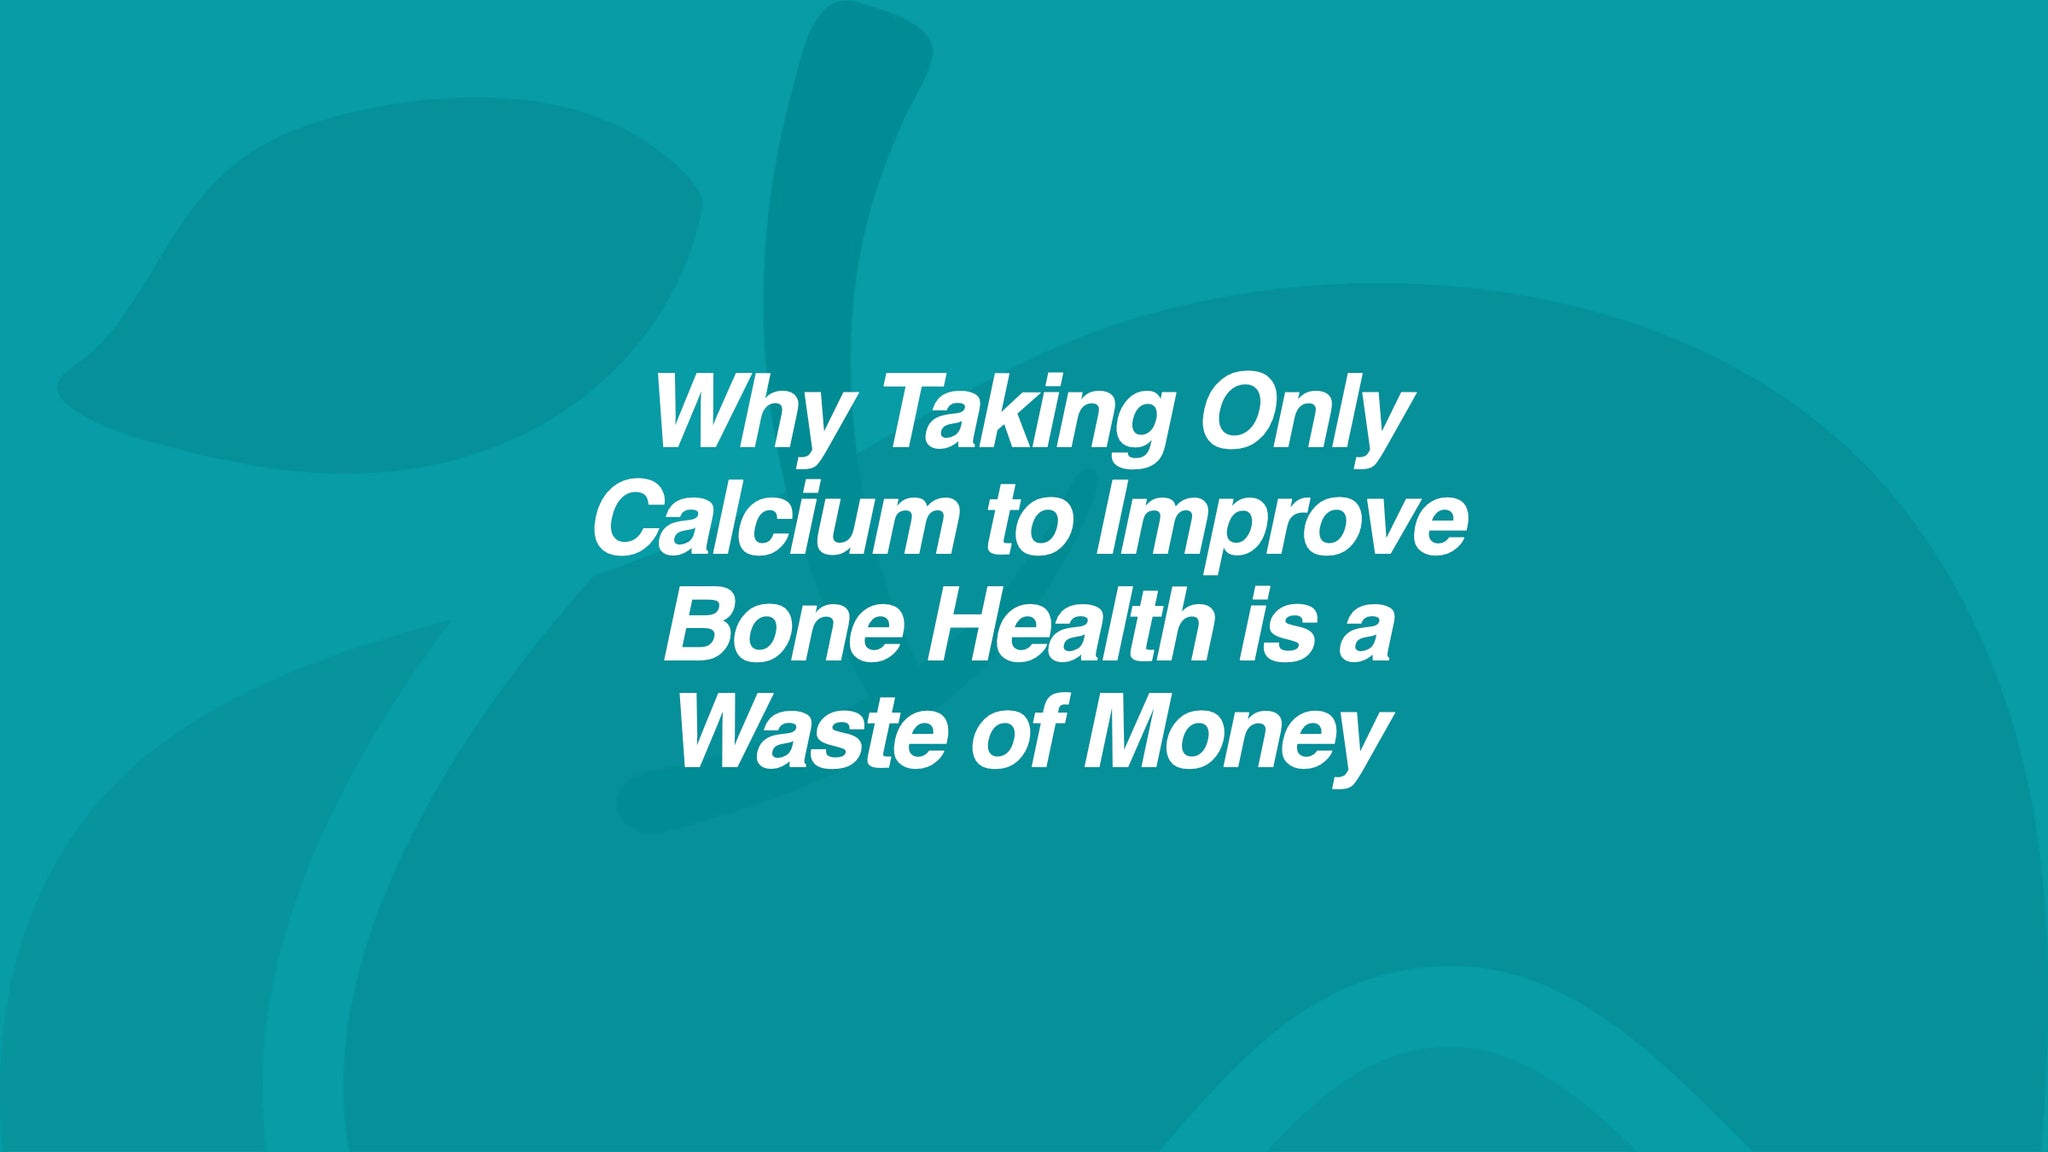 Why Taking Only Calcium to Improve Bone Health is a Waste of Money